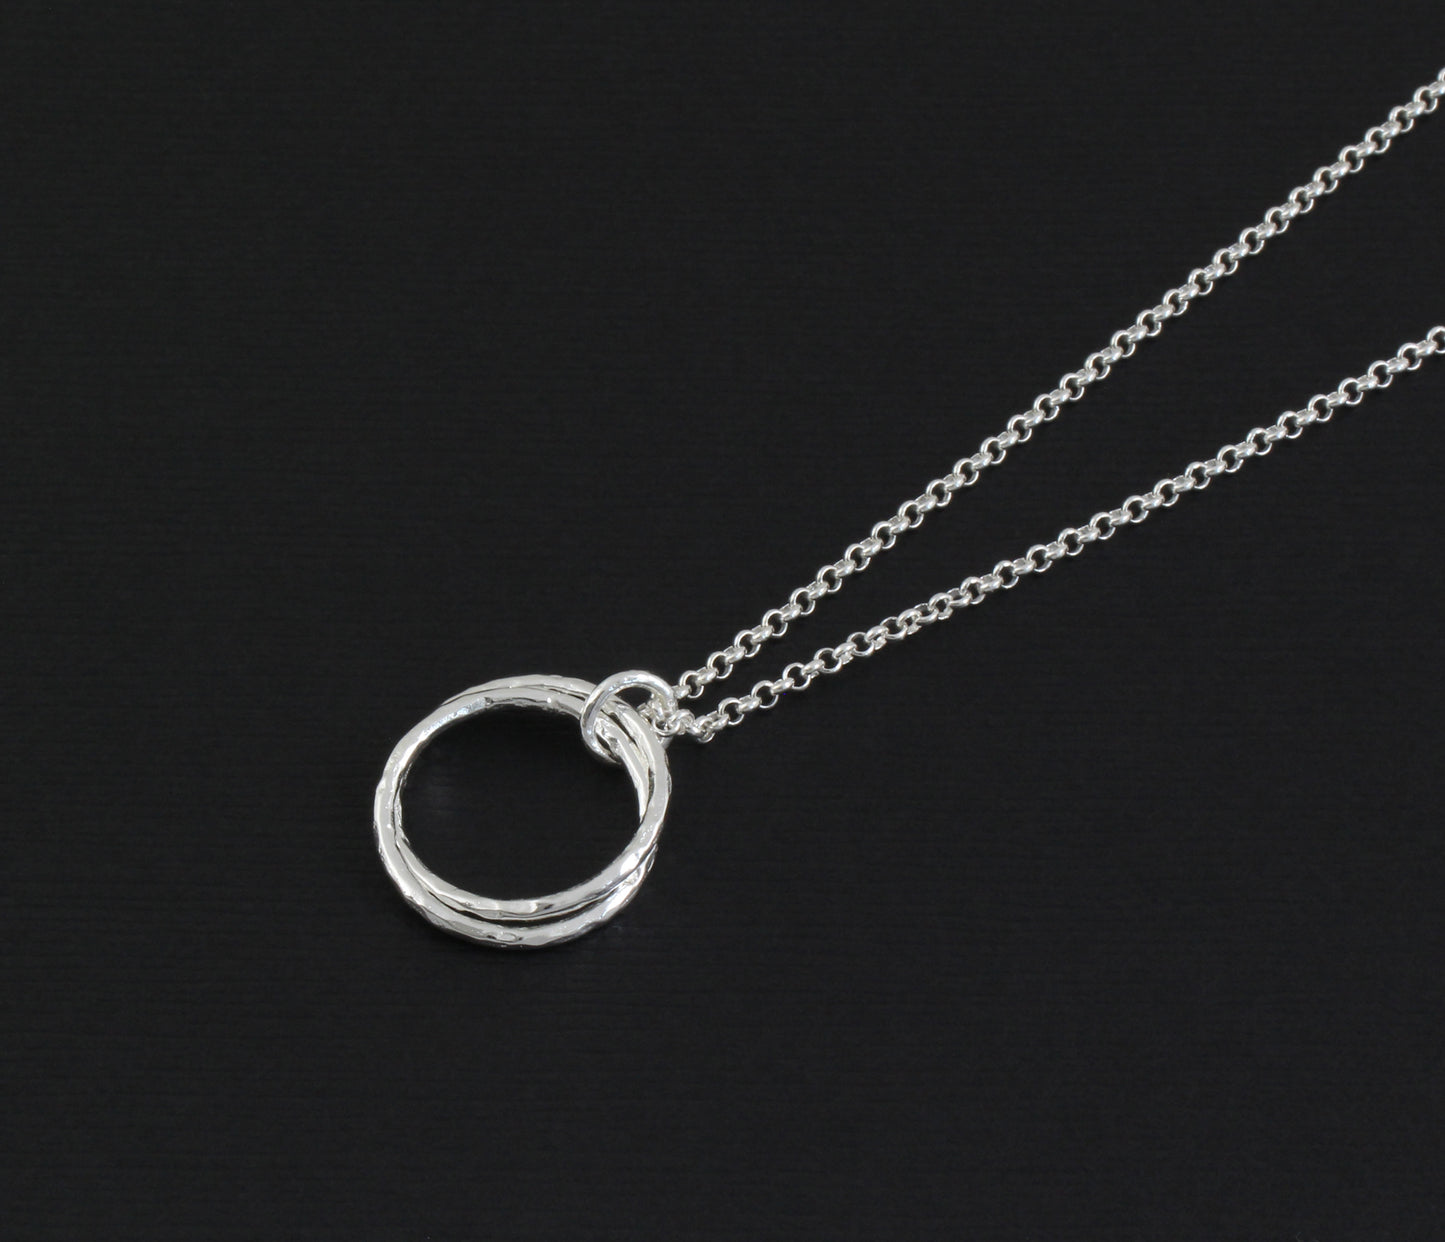 Grandmother & Granddaughter • Unique Gift for Grandma • Infinite Love • Silver • Intentional Keepsake Jewelry - Hammered Linked Infinity Ring Necklace